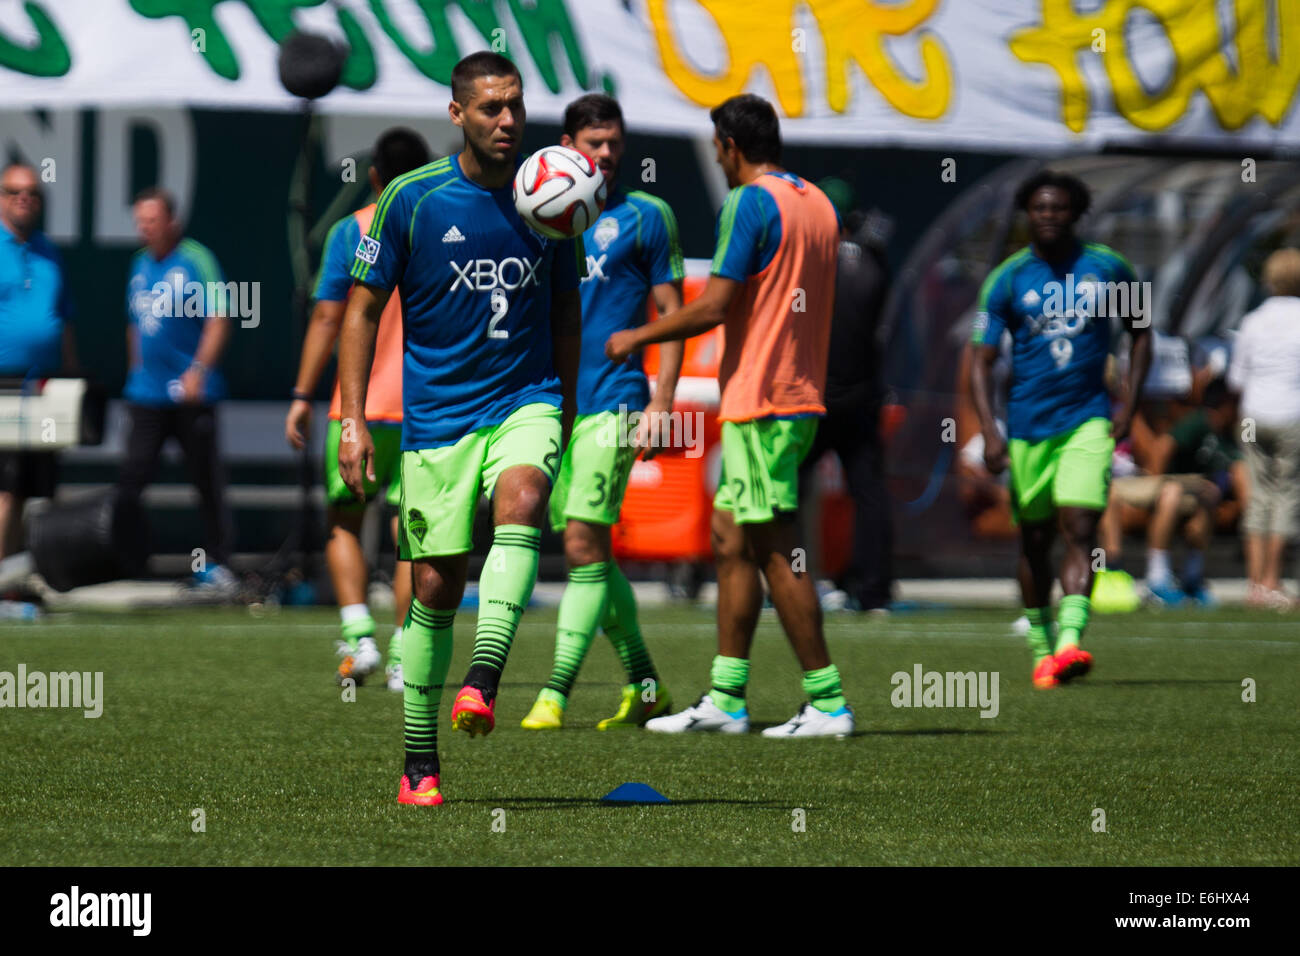 Aug. 24, 2014 - CLINT DEMPSEY (2) warms up before the game. The Portland Timbers FC play the Seattle Sounders FC at Providence Park on August 24, 2014. © David Blair/ZUMA Wire/Alamy Live News Stock Photo